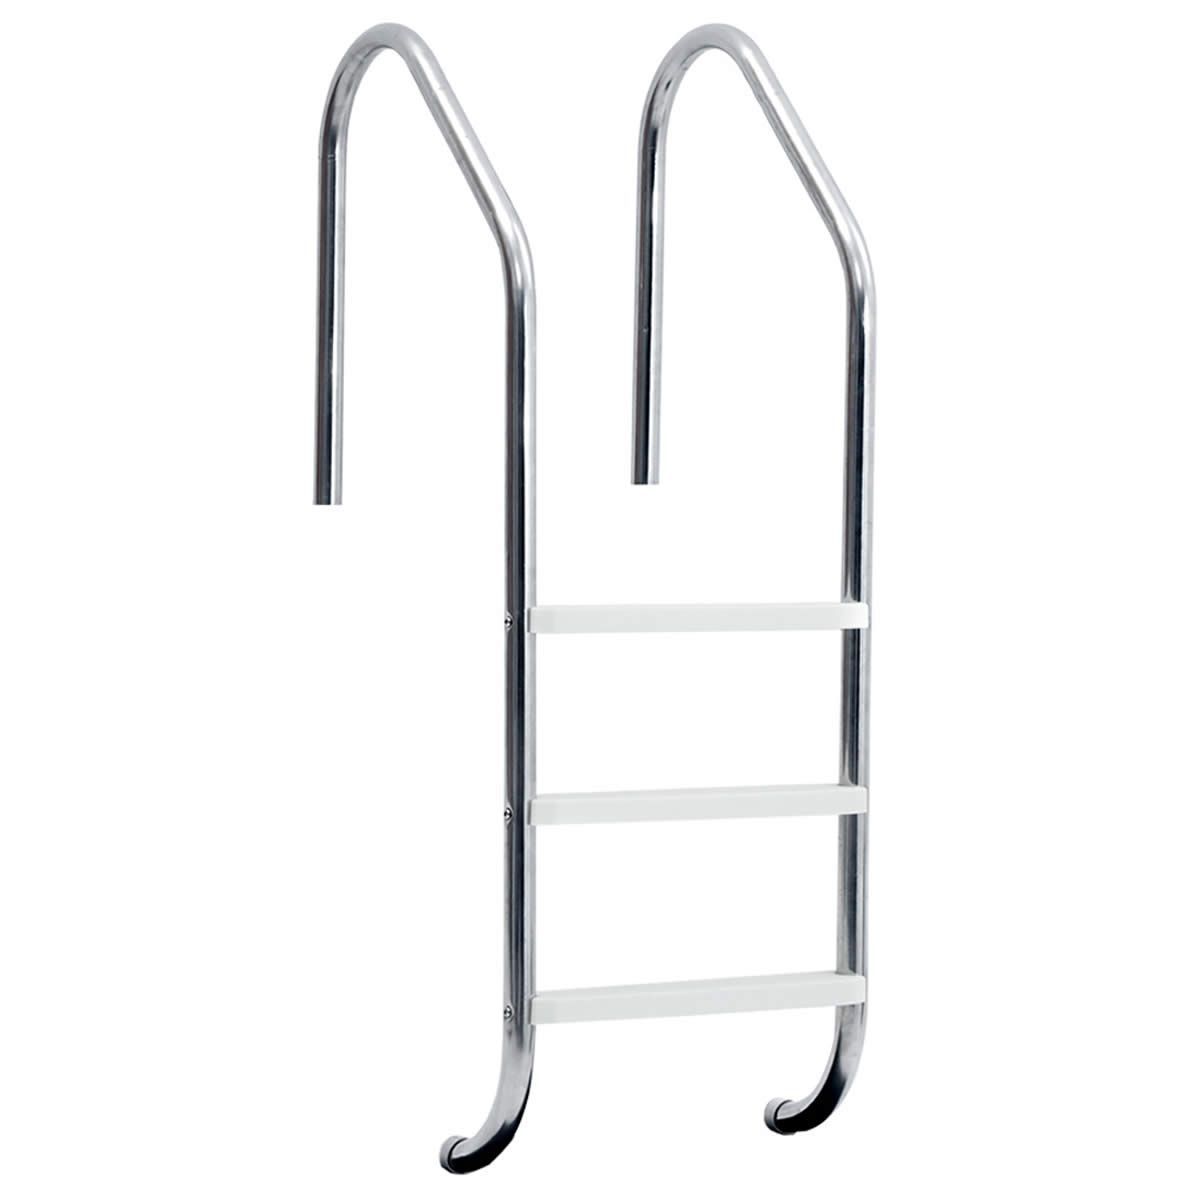 Stainless Steel Pool Ladder with 3 Plastic Slotted Non-slip Steps